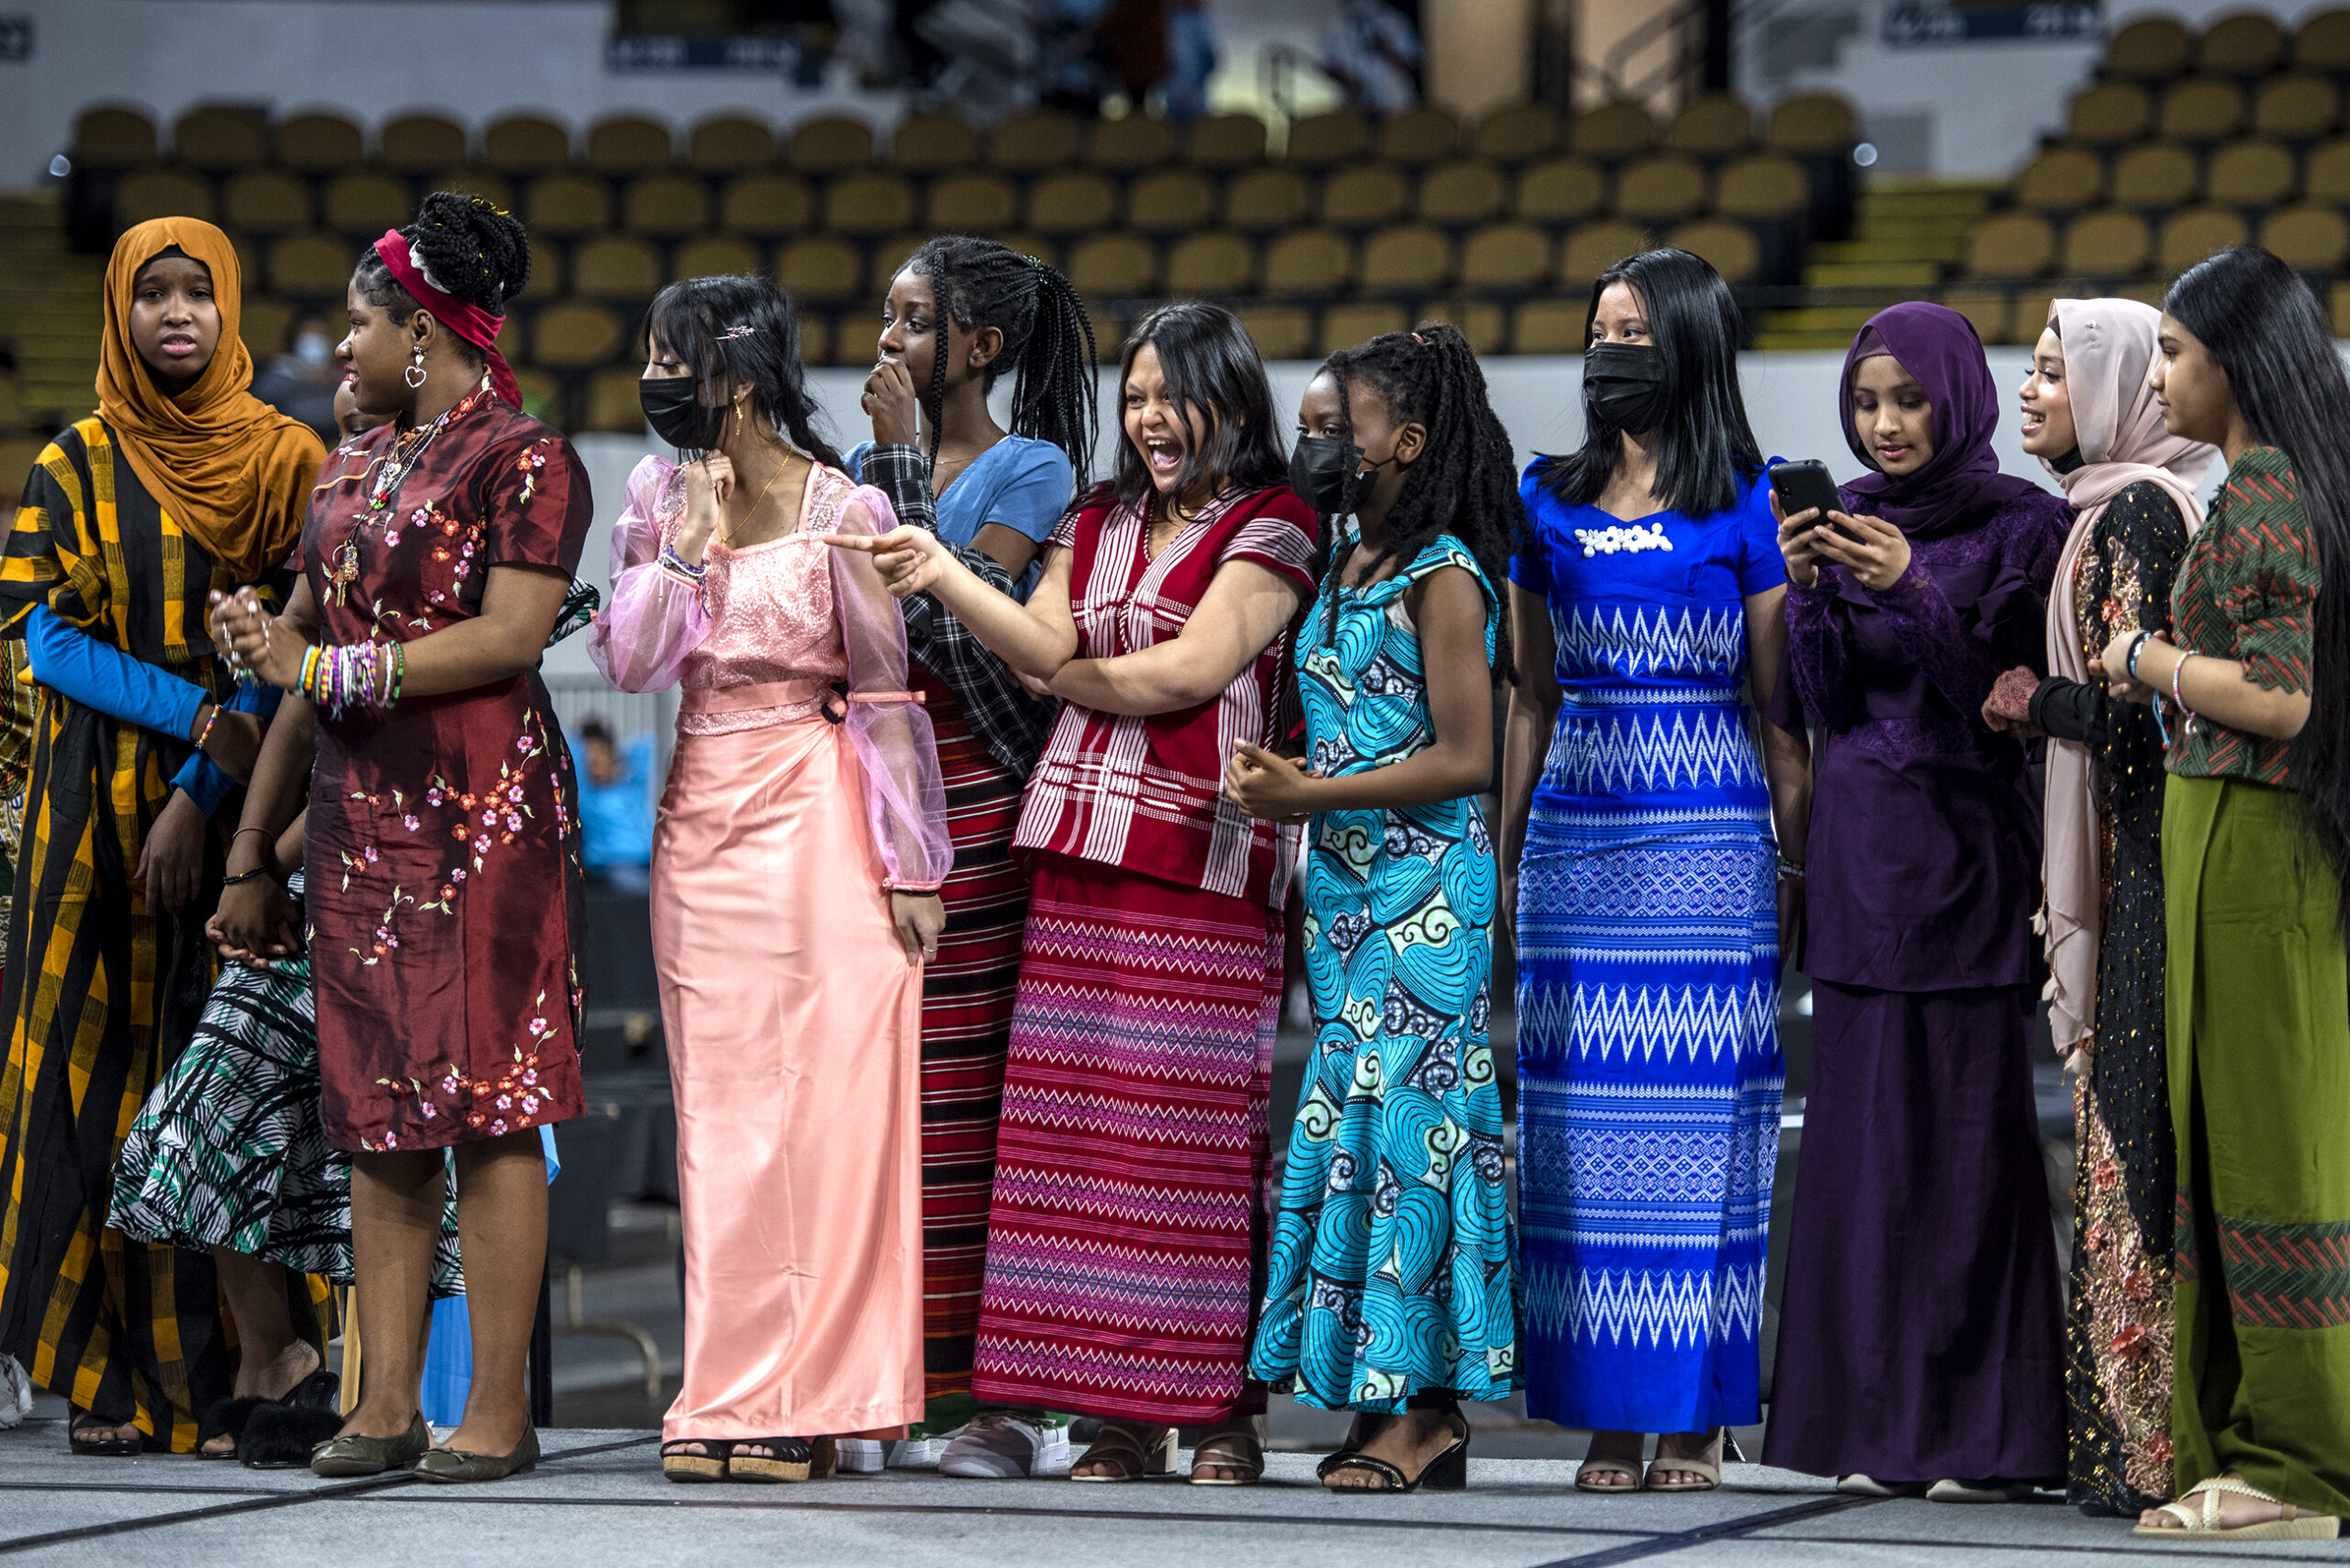 Students in colorful clothing representing different countries watch as their fellow classmates walk on stage and explain the culture behind their clothing to a crowd.